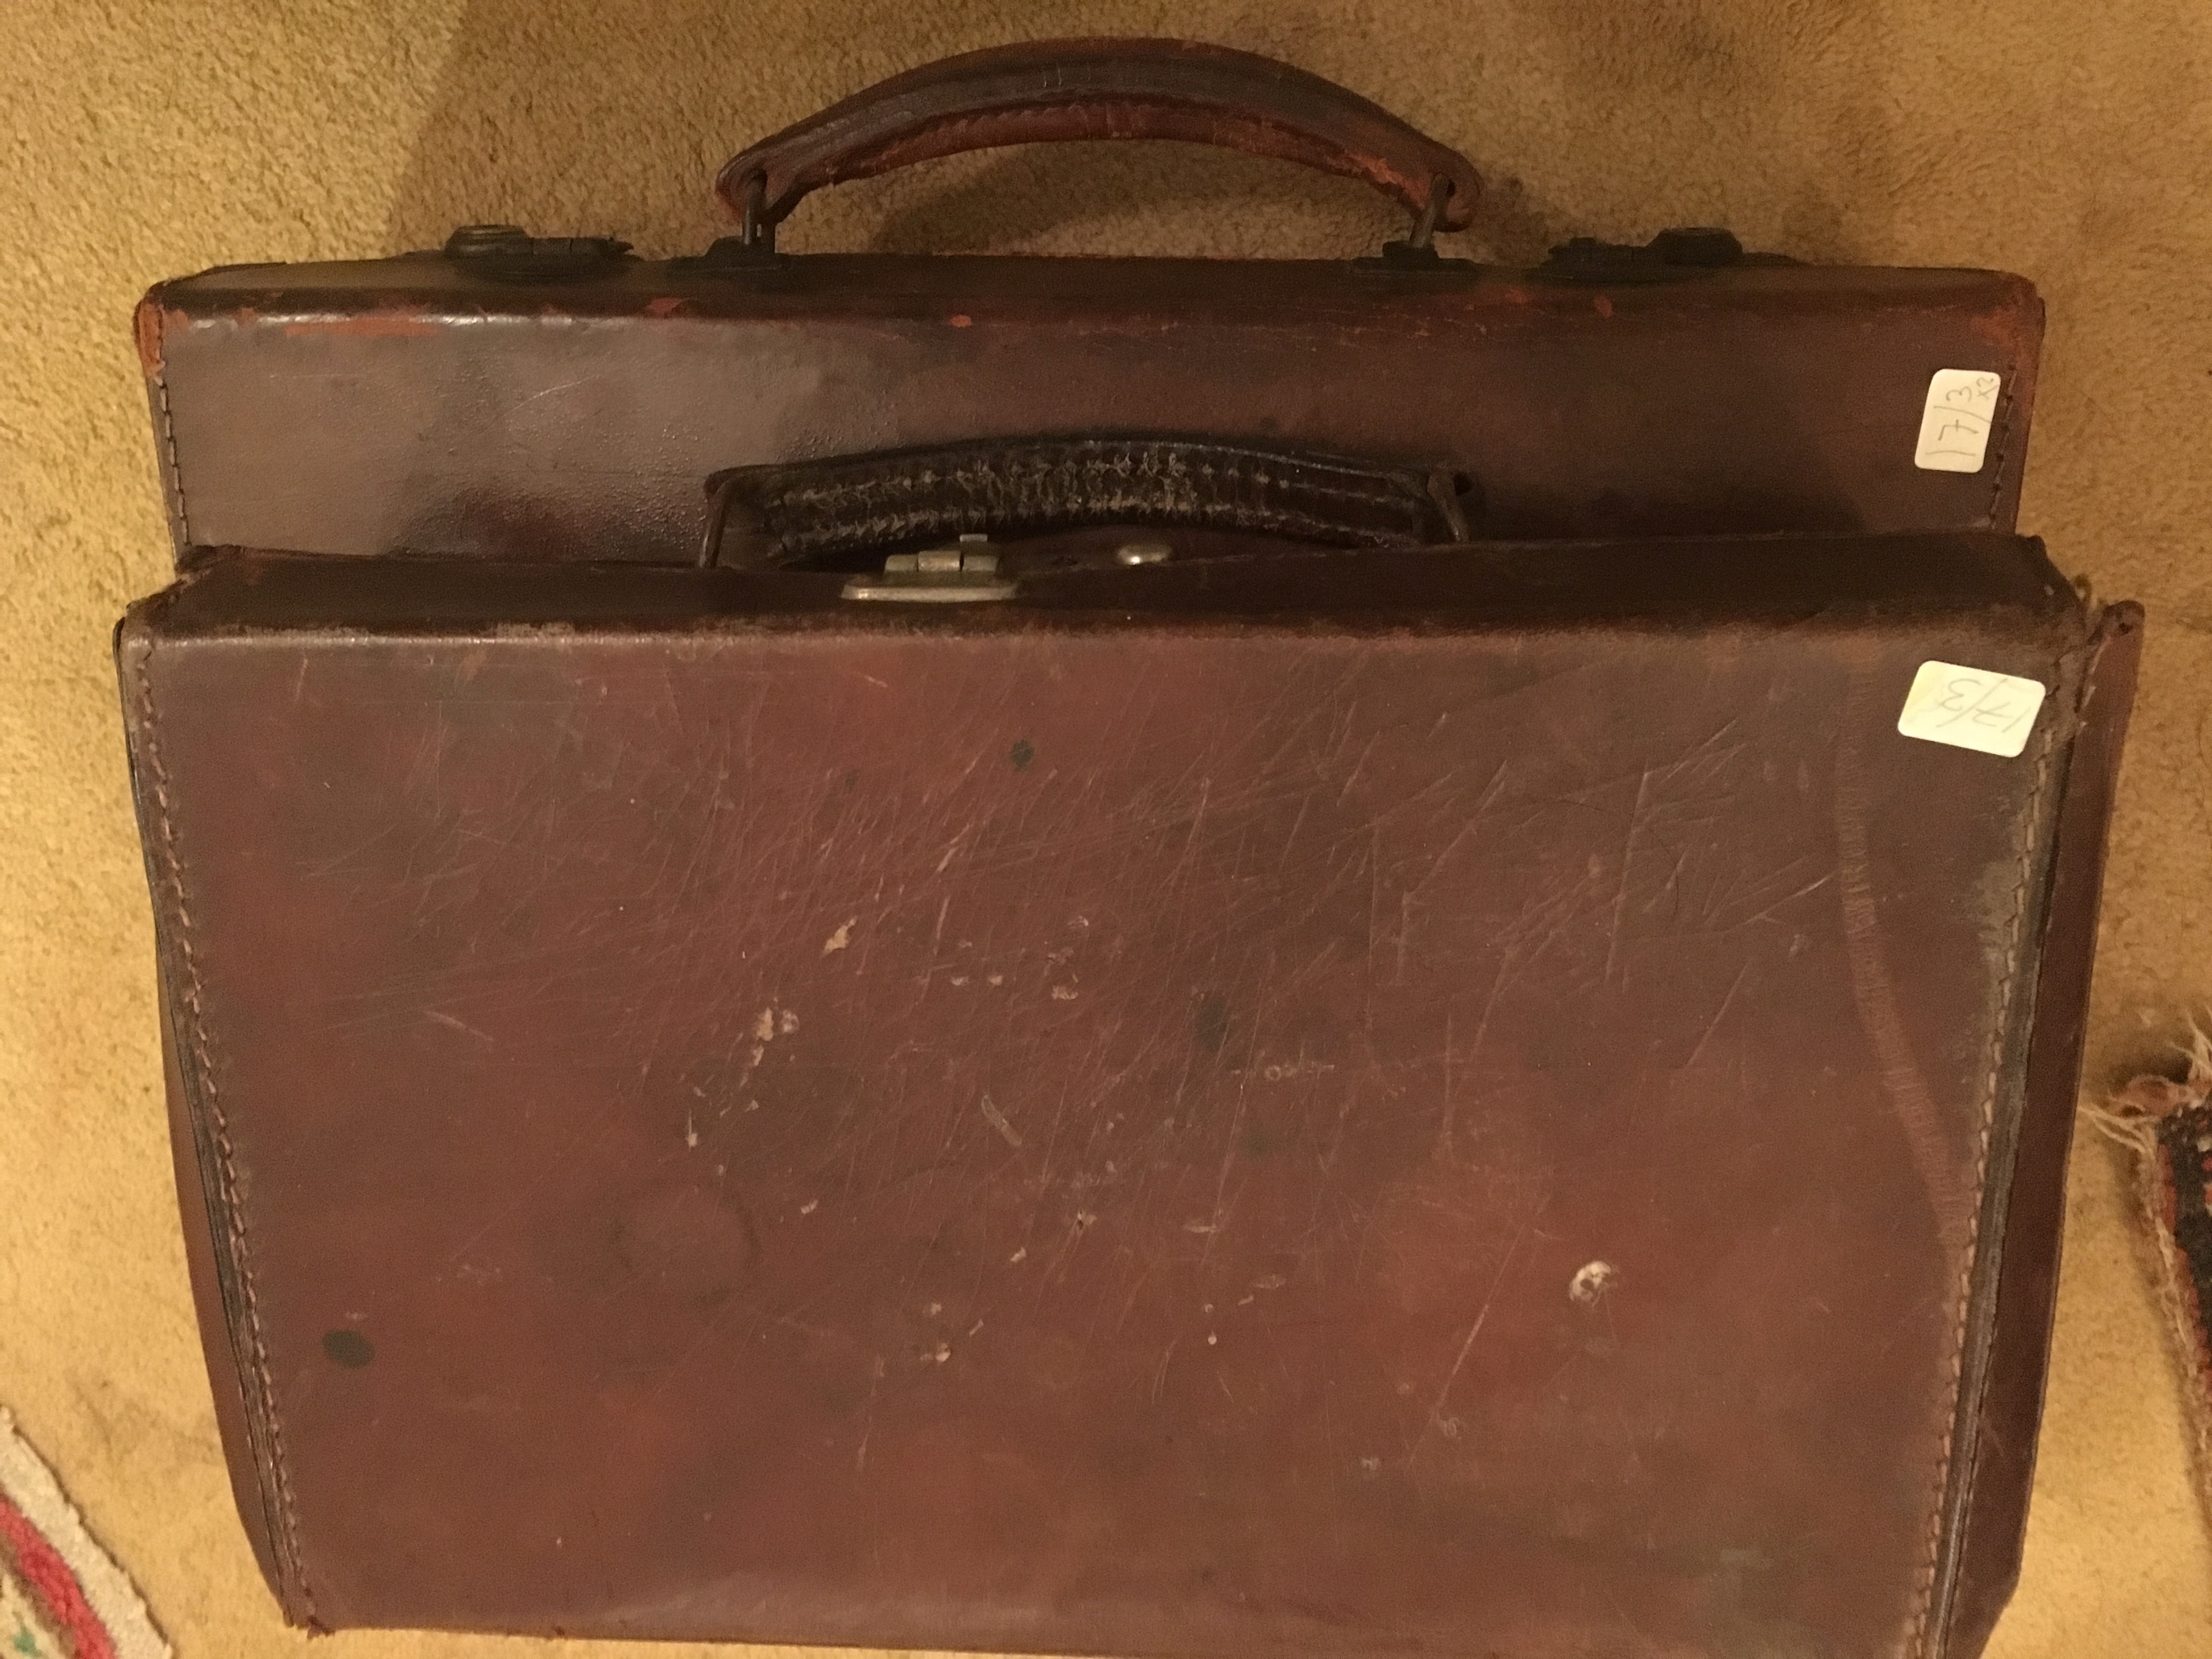 Two small leather suitcases and a gentlemans briefcase with brass fittings